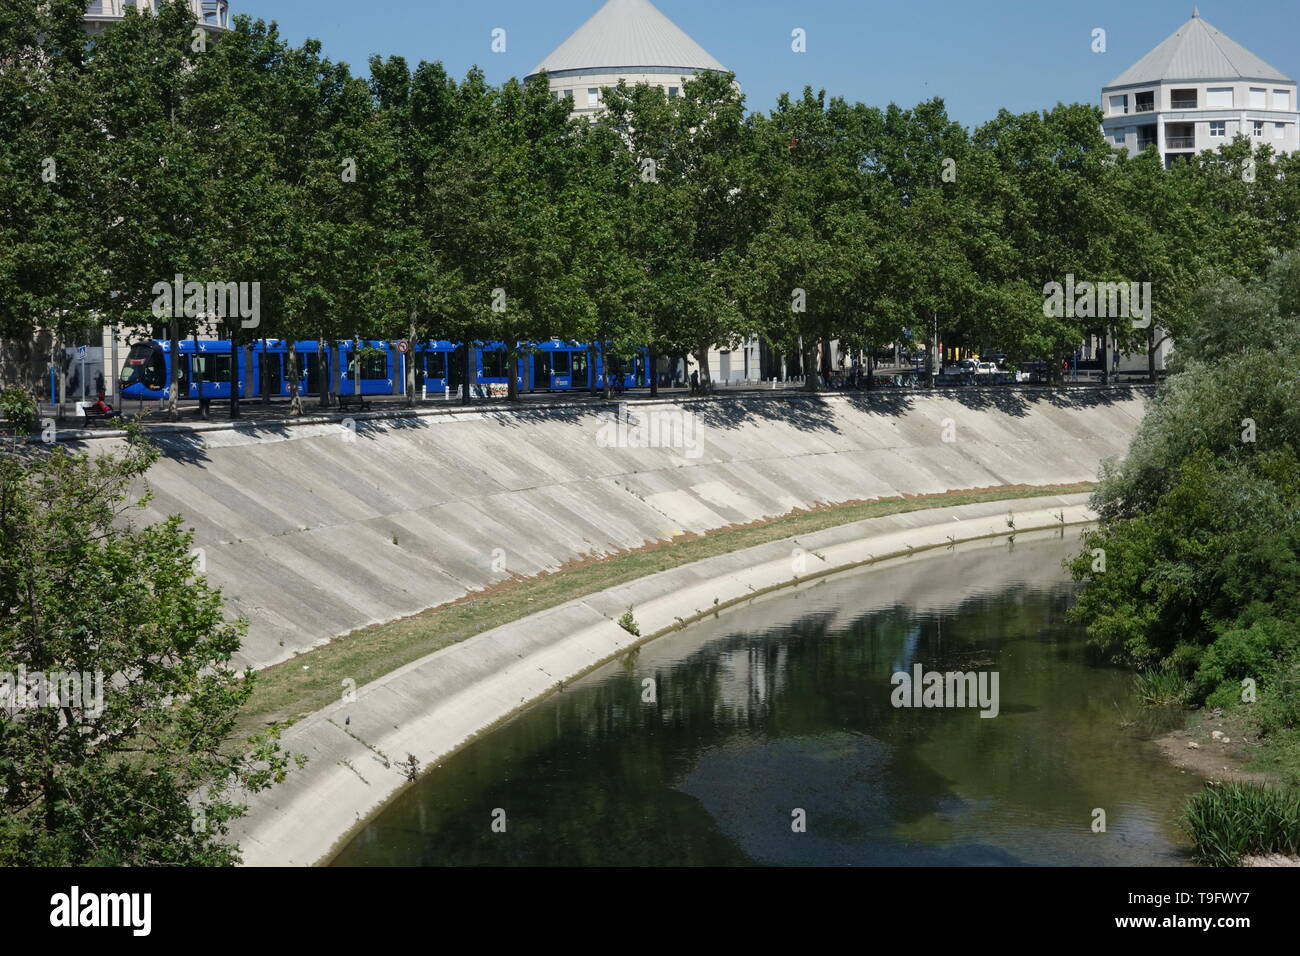 Montpellier, Tramway, Linie 1, Moulares Banque D'Images